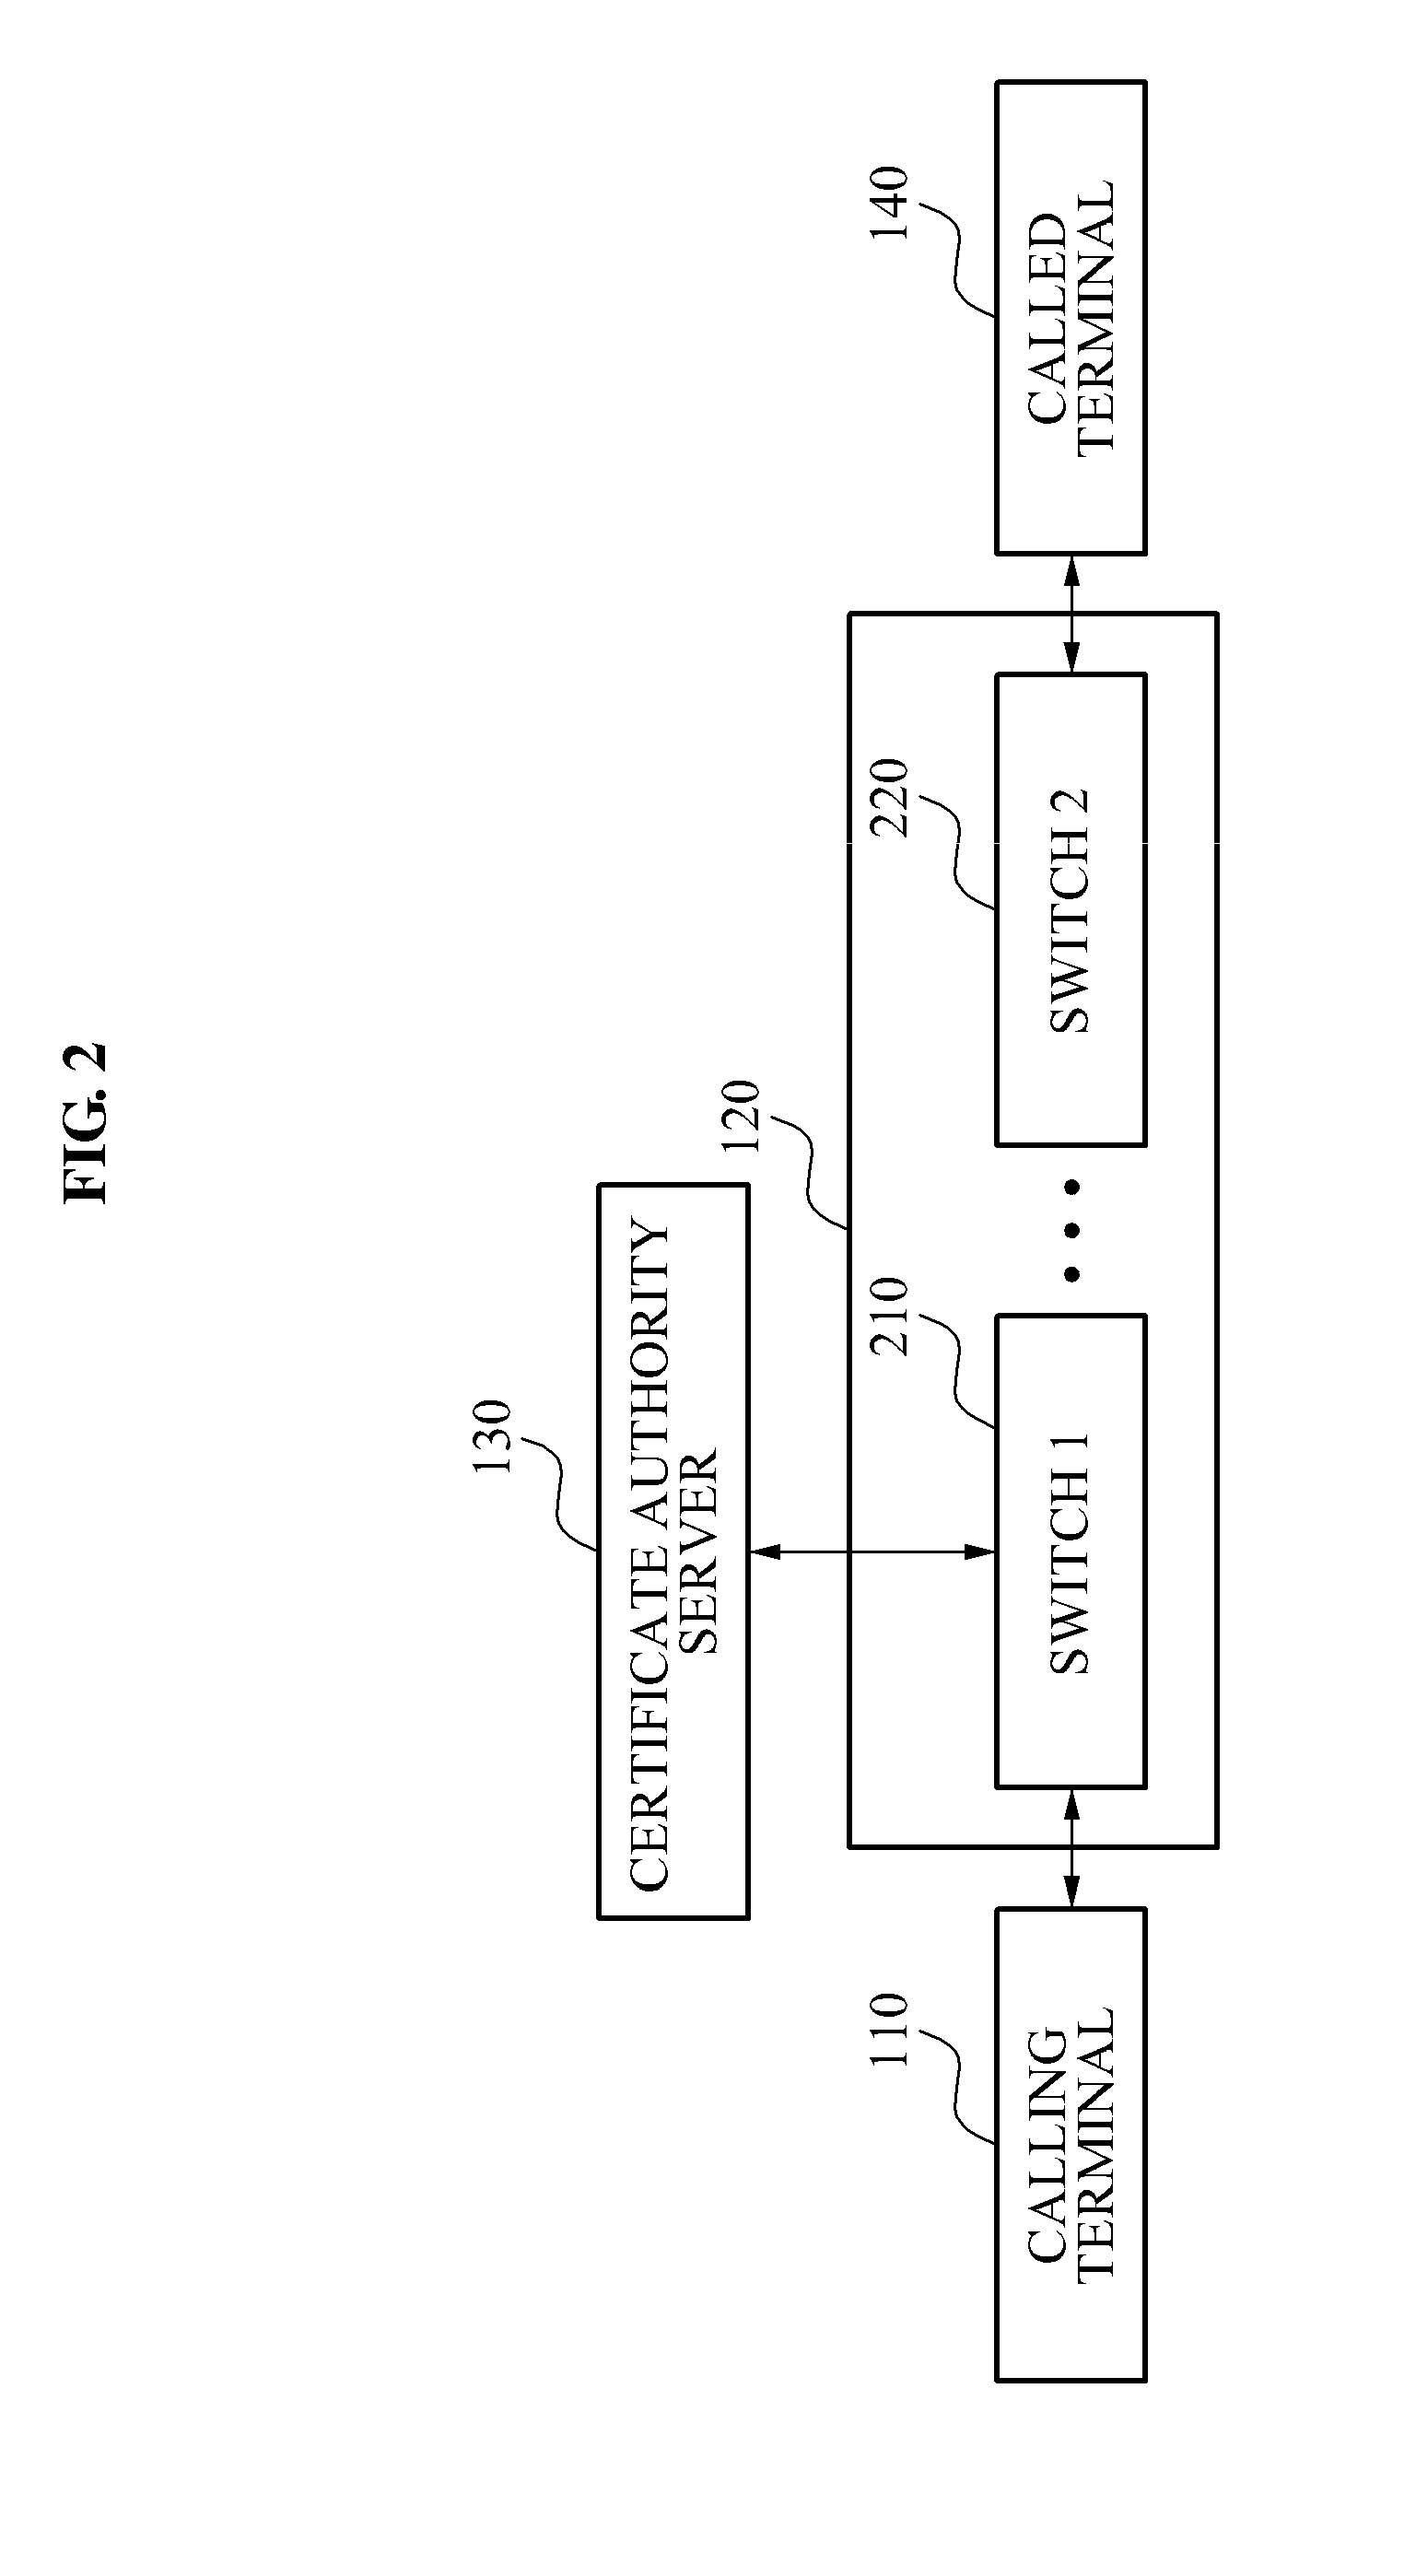 Caller authentication system and method for phishing prevention